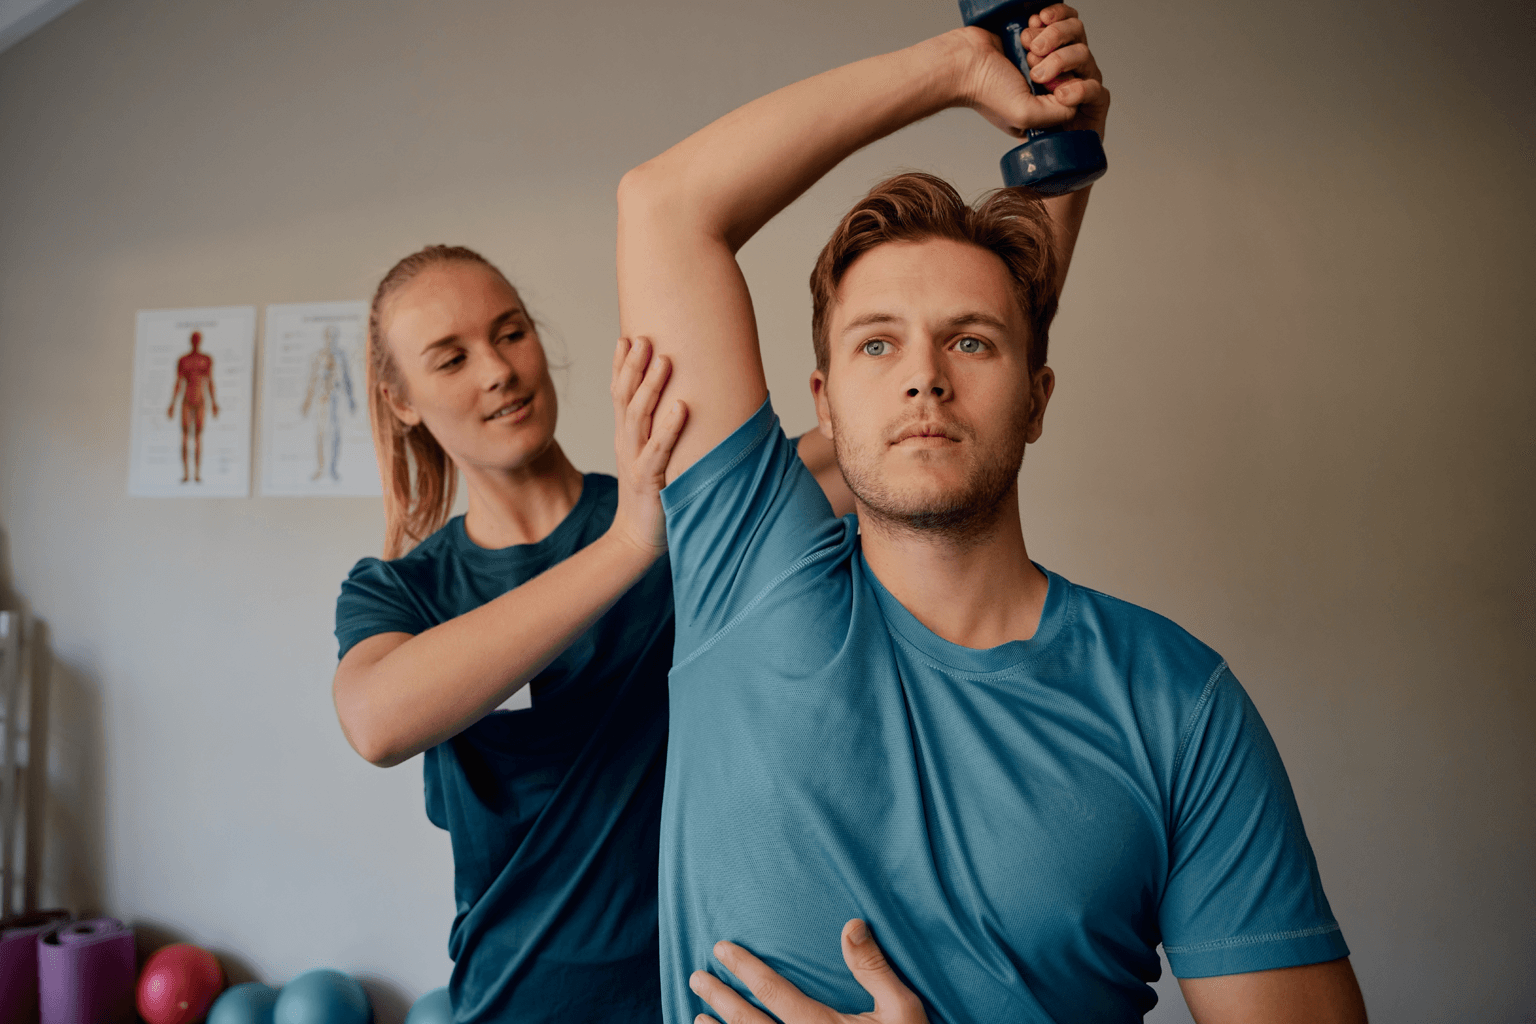 A woman physiotherapist helps a patient raise his arm over his head while holding a handweight.